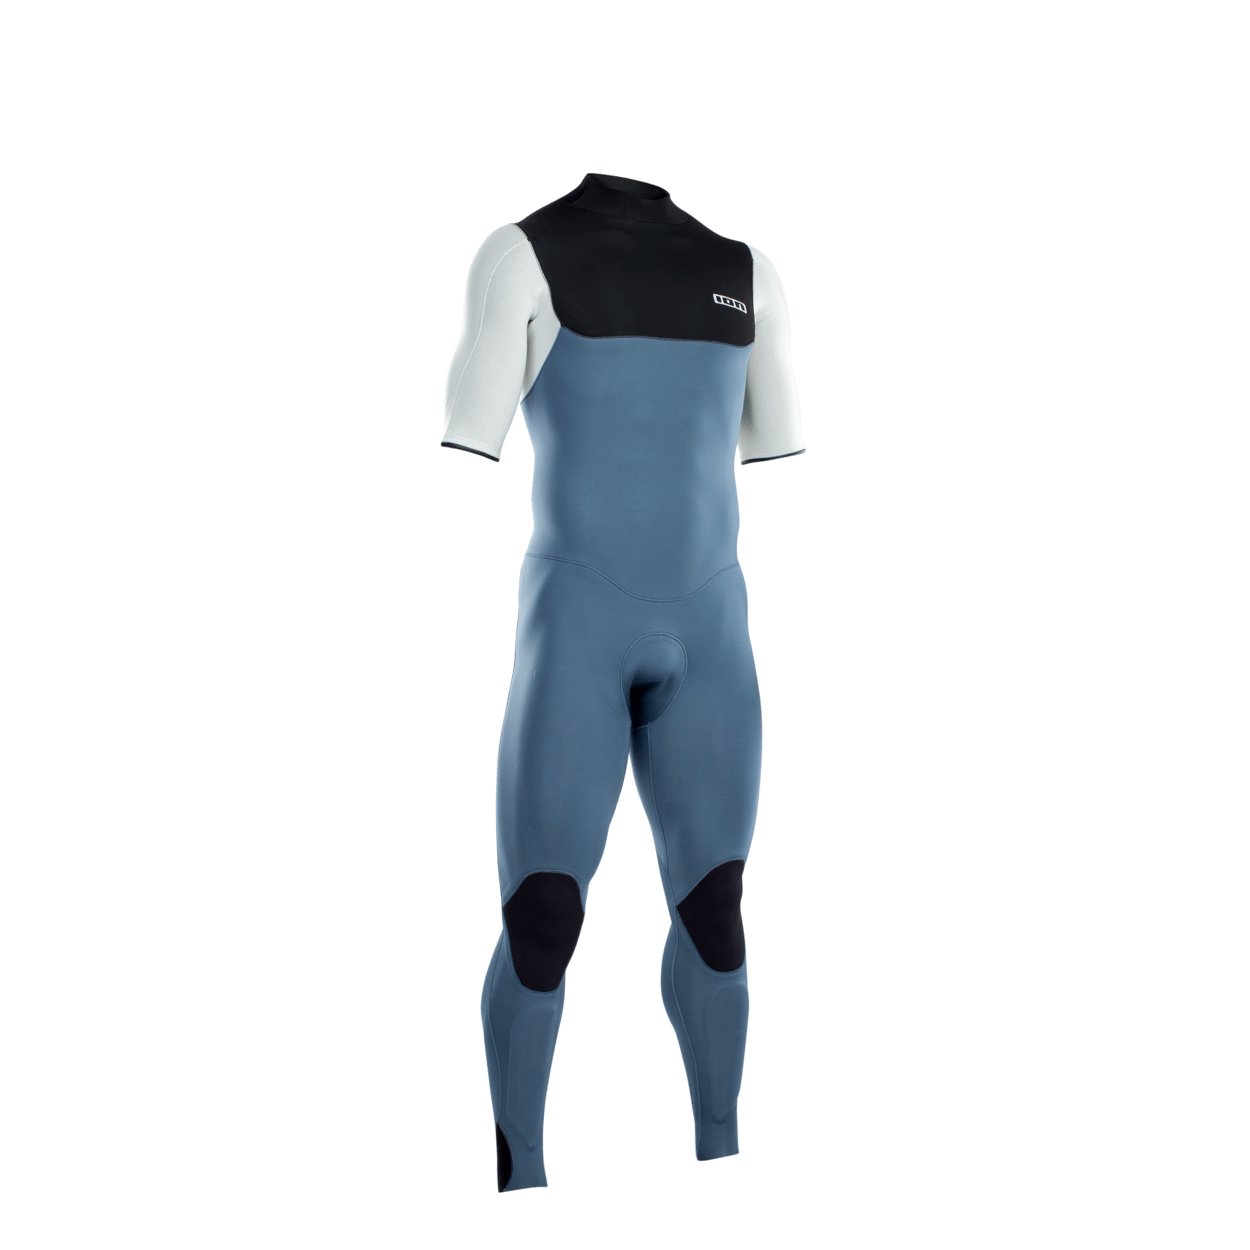 ION Seek Core Steamer SS 3/2 BZ DL 2021 - Worthing Watersports - 9008415946617 - Wetsuits - ION Water